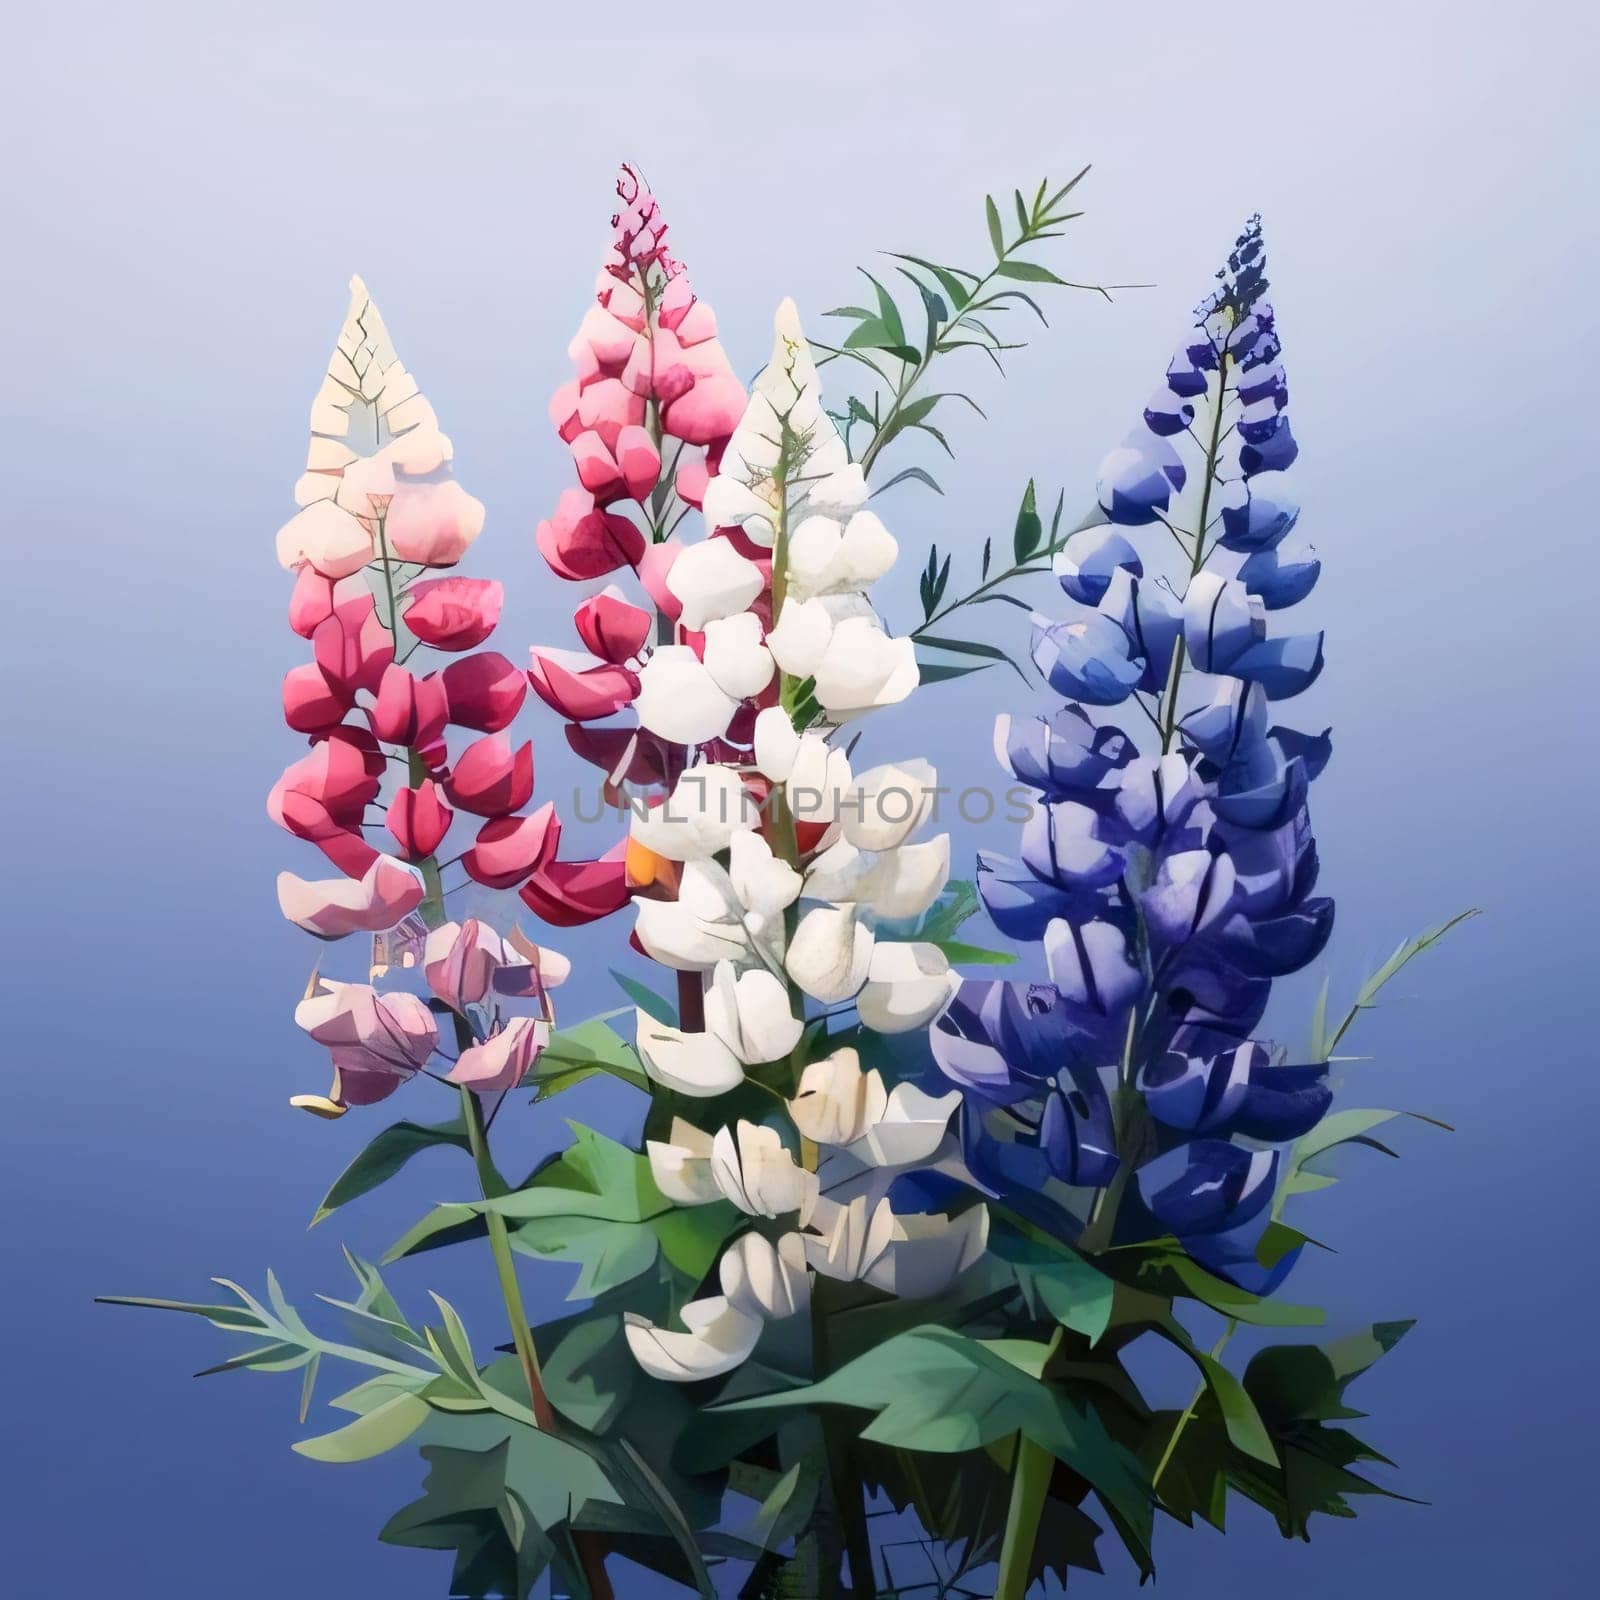 Illustration was a pocket of colorful white, pink, navy blue flowers. Flowering flowers, a symbol of spring, new life. A joyful time of nature waking up to life.